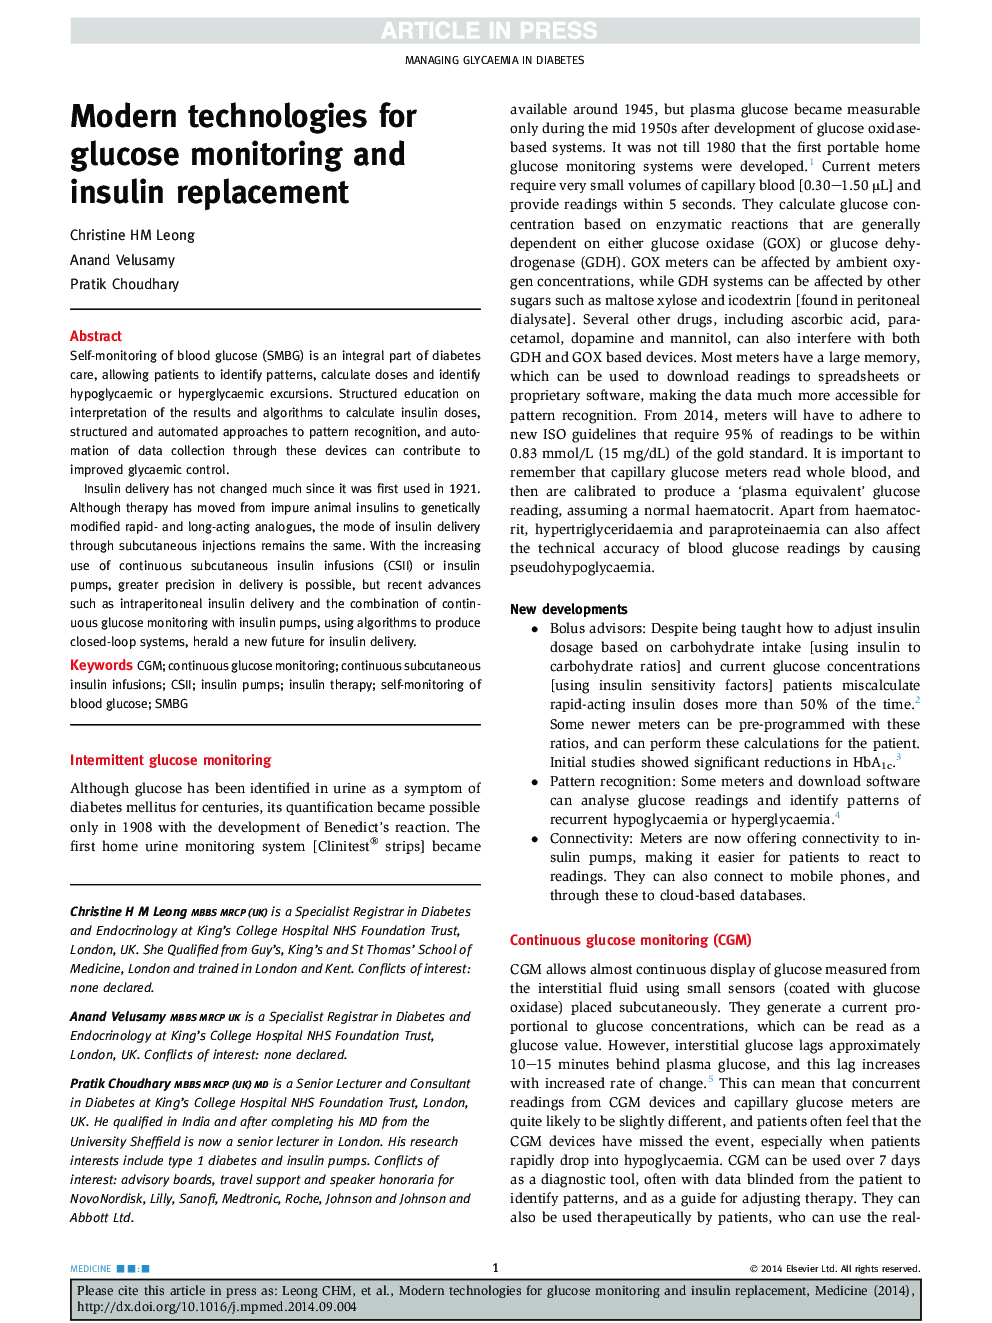 Modern technologies for glucose monitoring and insulin replacement